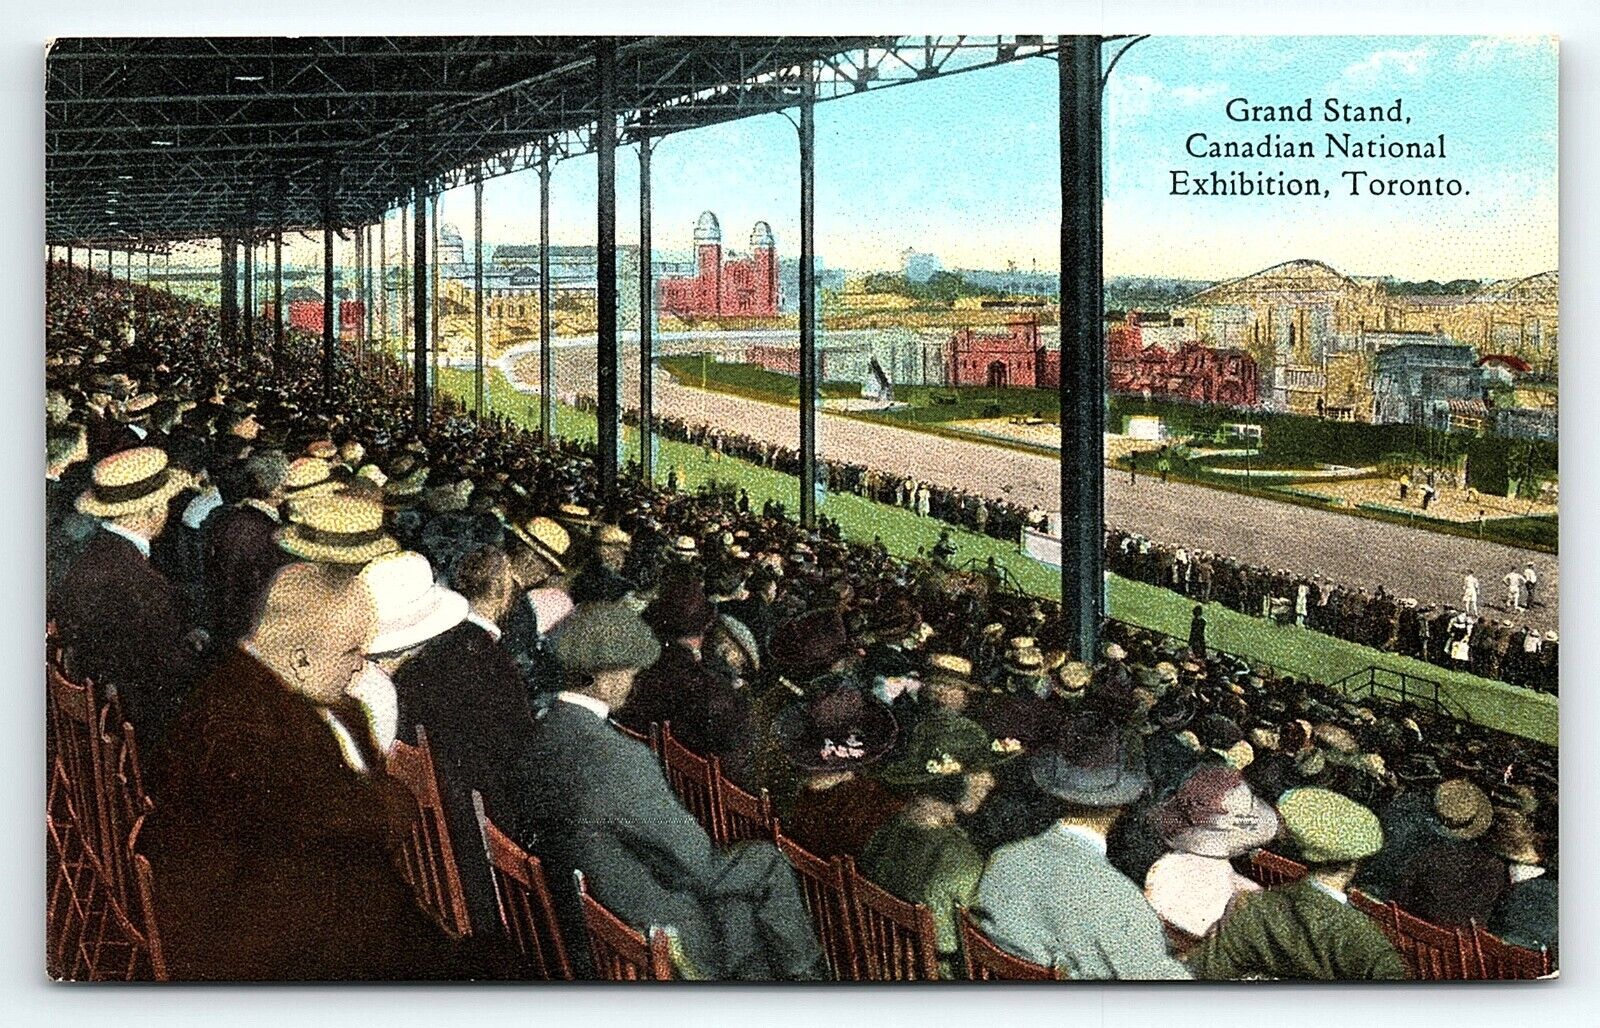 1920s TORONTO CANADIAN NATIONAL EXHIBITION GRAND STAND CROWD POSTCARD P1815